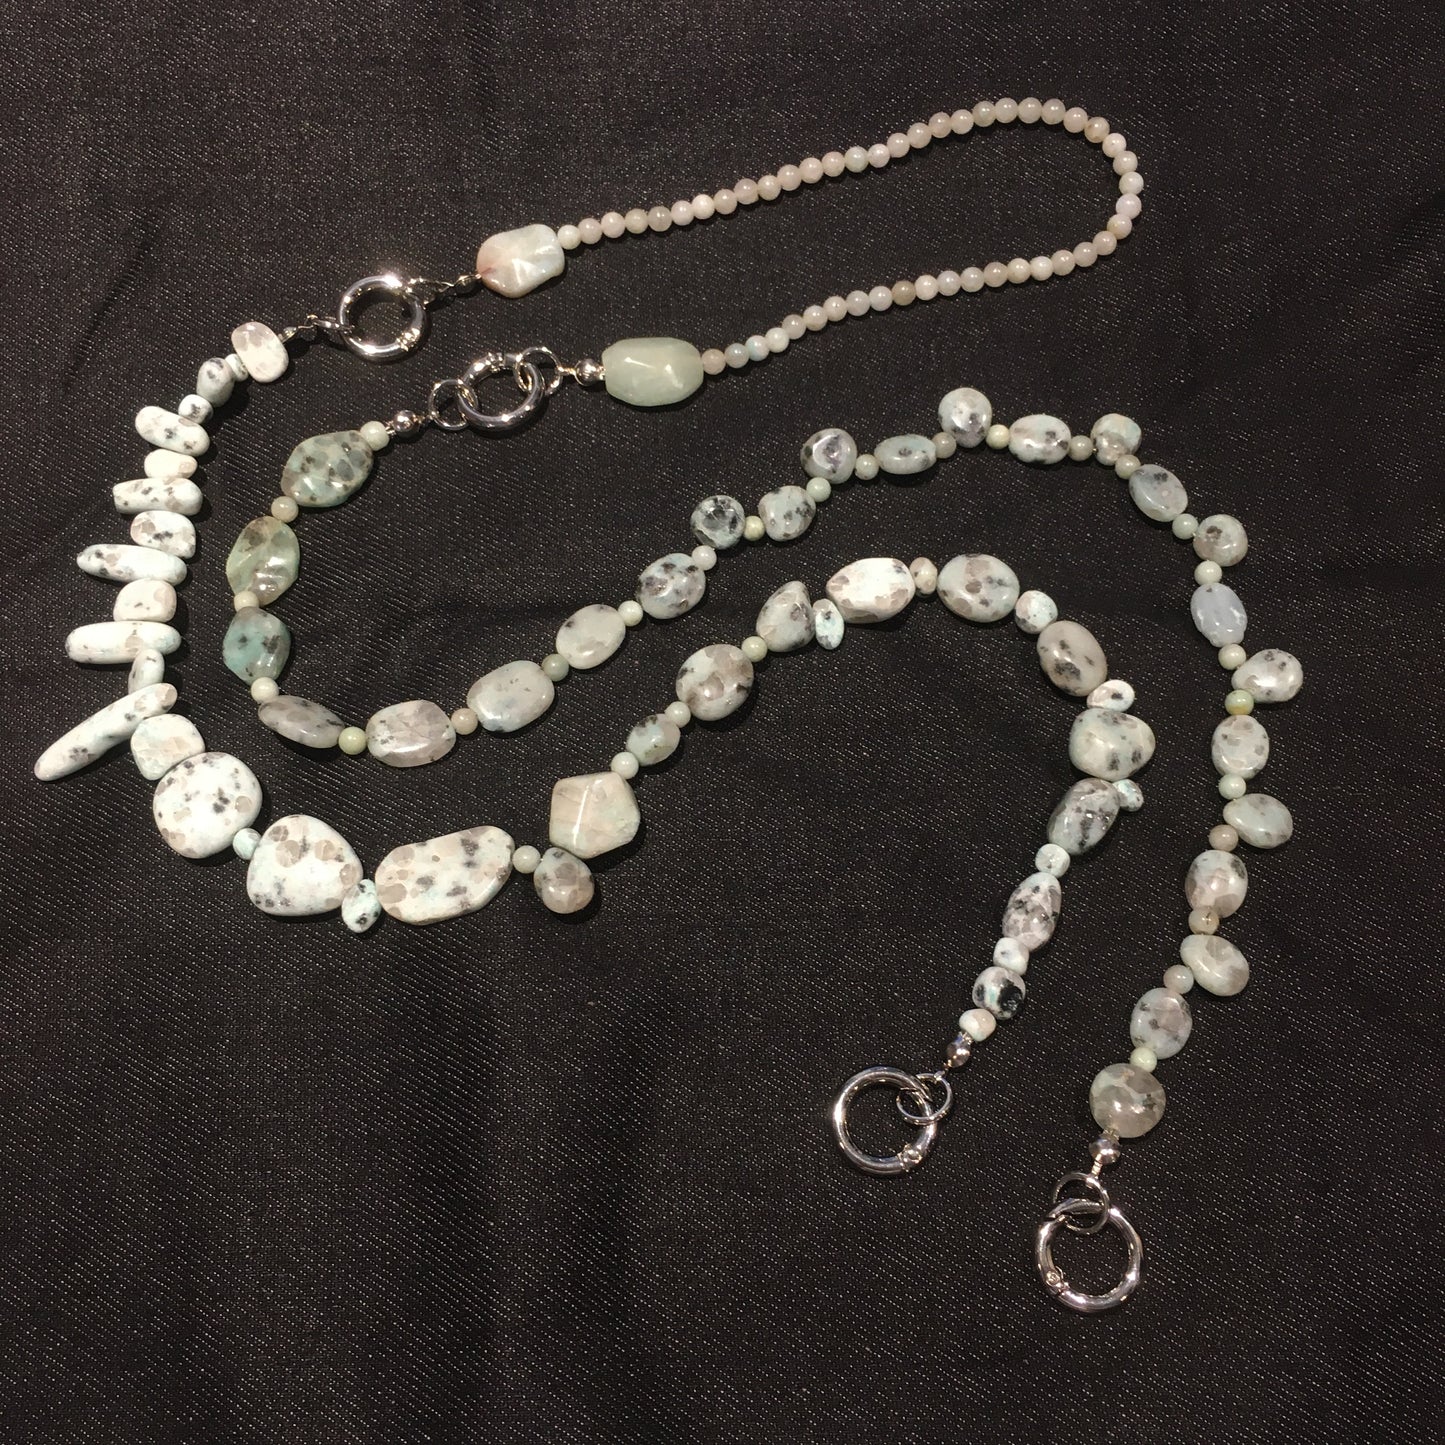 Green lake stones 2 ways phone strap / long necklace / belt / chain